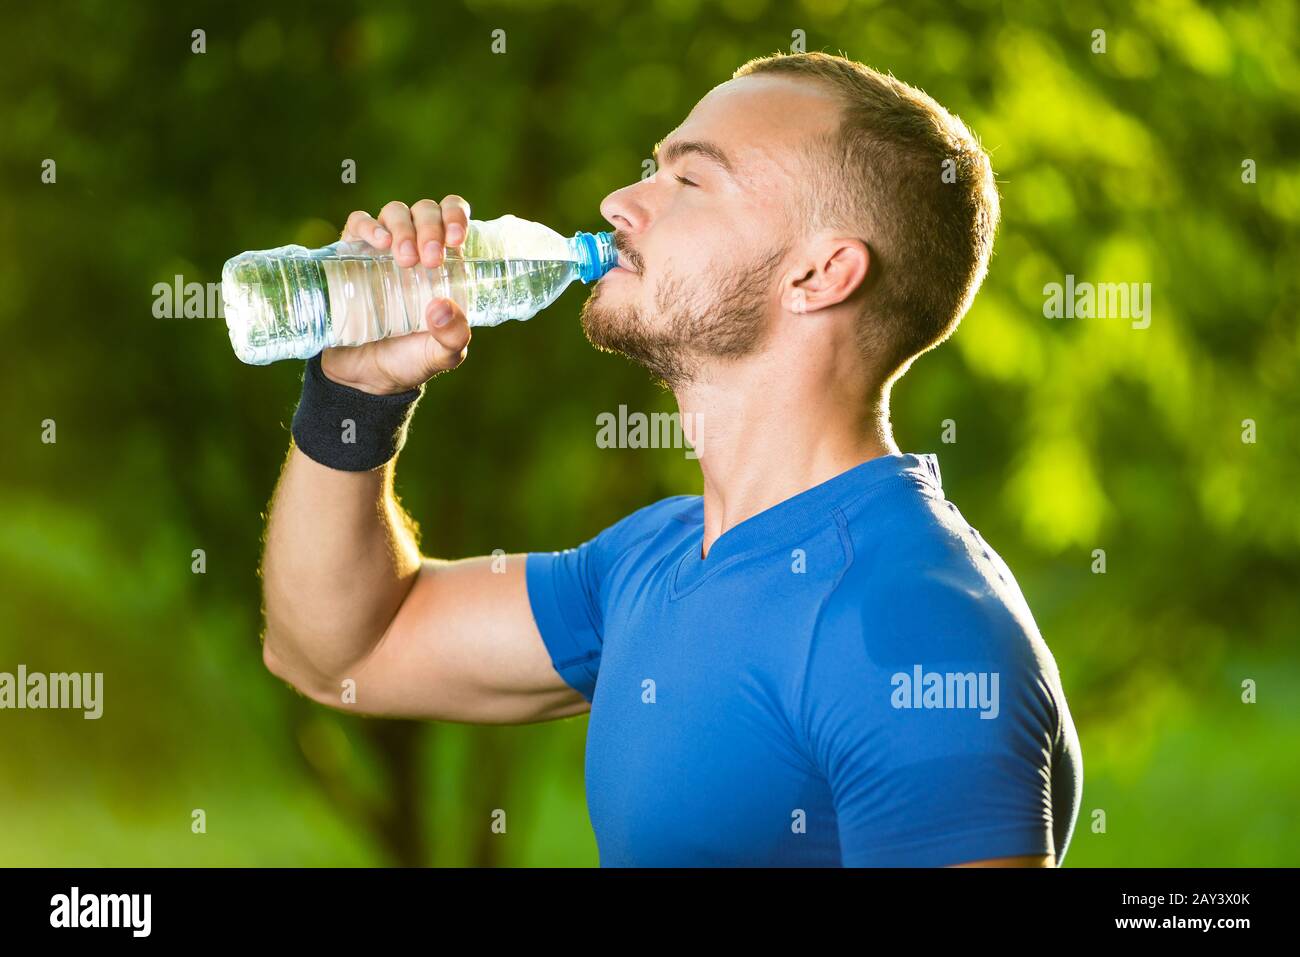 https://c8.alamy.com/comp/2AY3X0K/athletic-mature-man-drinking-water-from-a-bottle-2AY3X0K.jpg